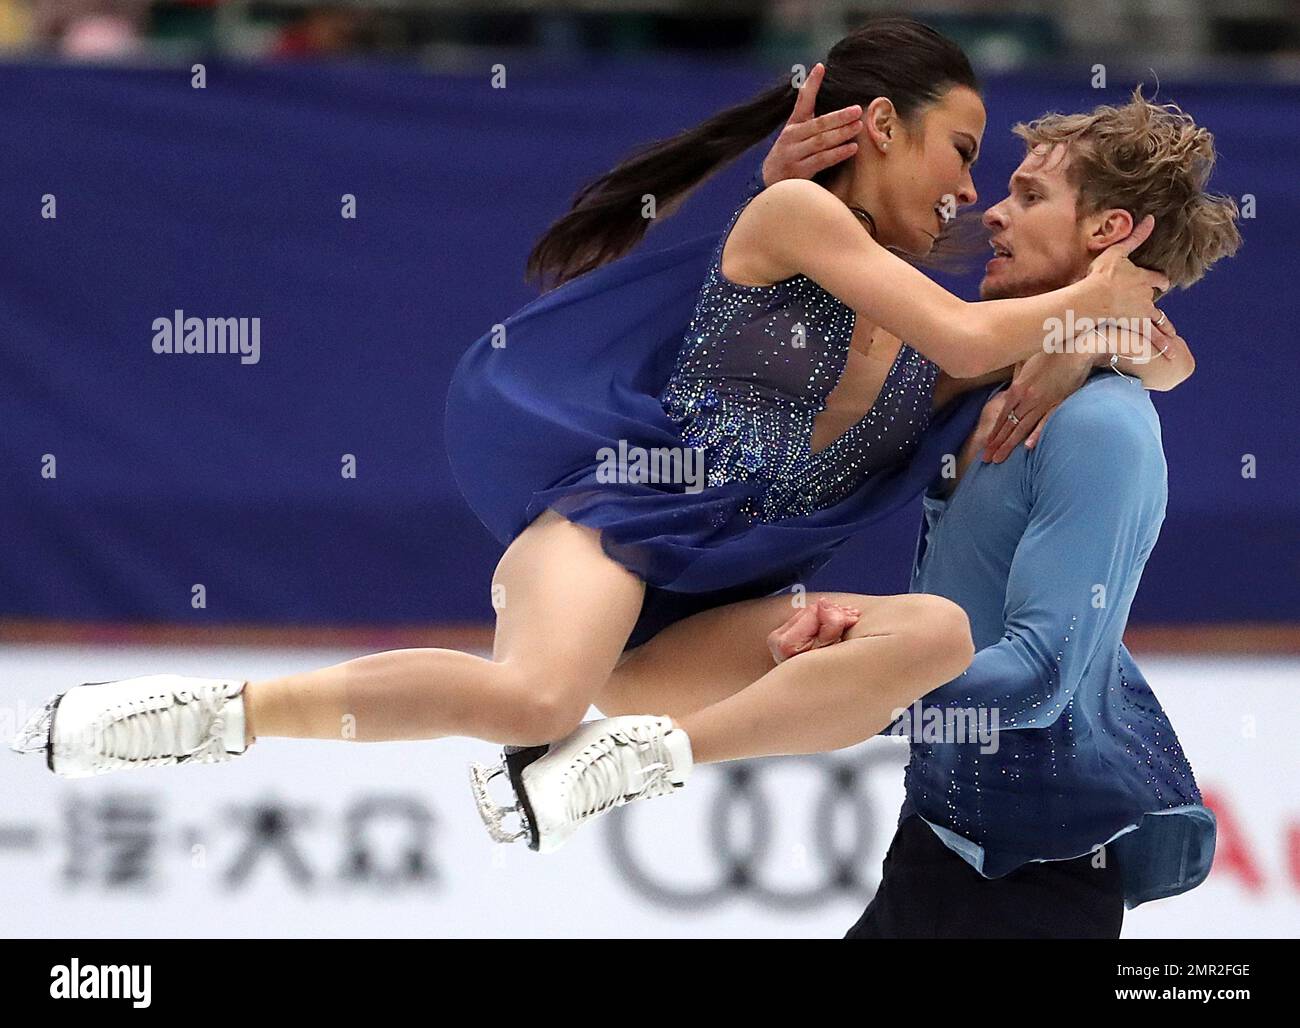 Madison Chock, left, and Evan Bates of the United States compete in the Ice Dance Free Dance during the Audi Cup of China ISU Grand Prix of Figure Skating 2017 at the